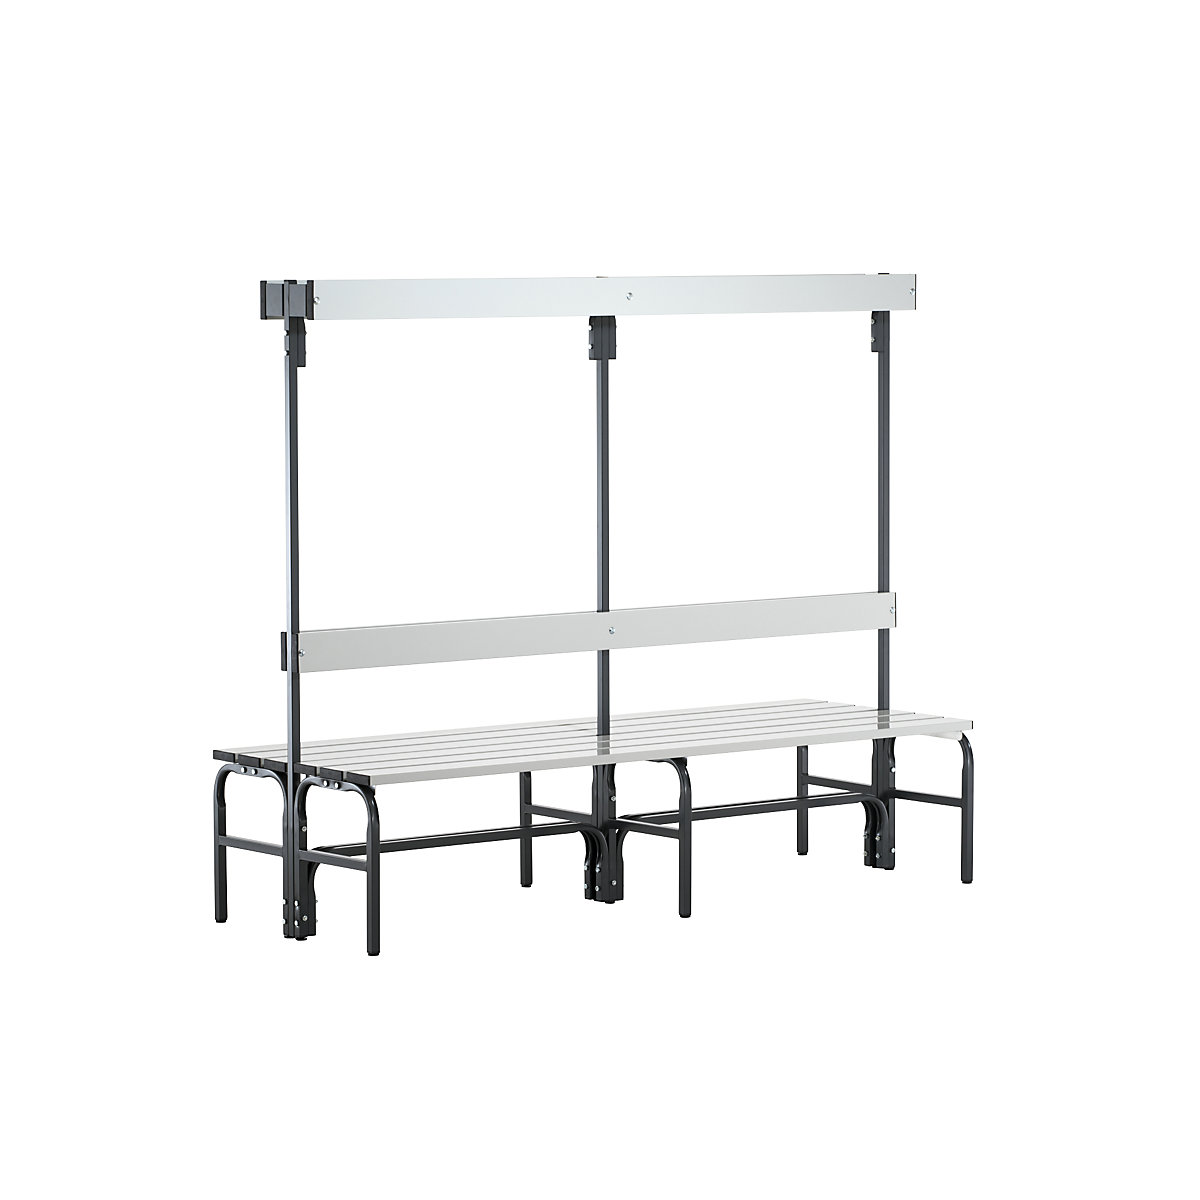 Sypro – Changing room bench made of stainless steel, HxD 1650 x 725 mm, length 1500 mm, 12 hooks, charcoal